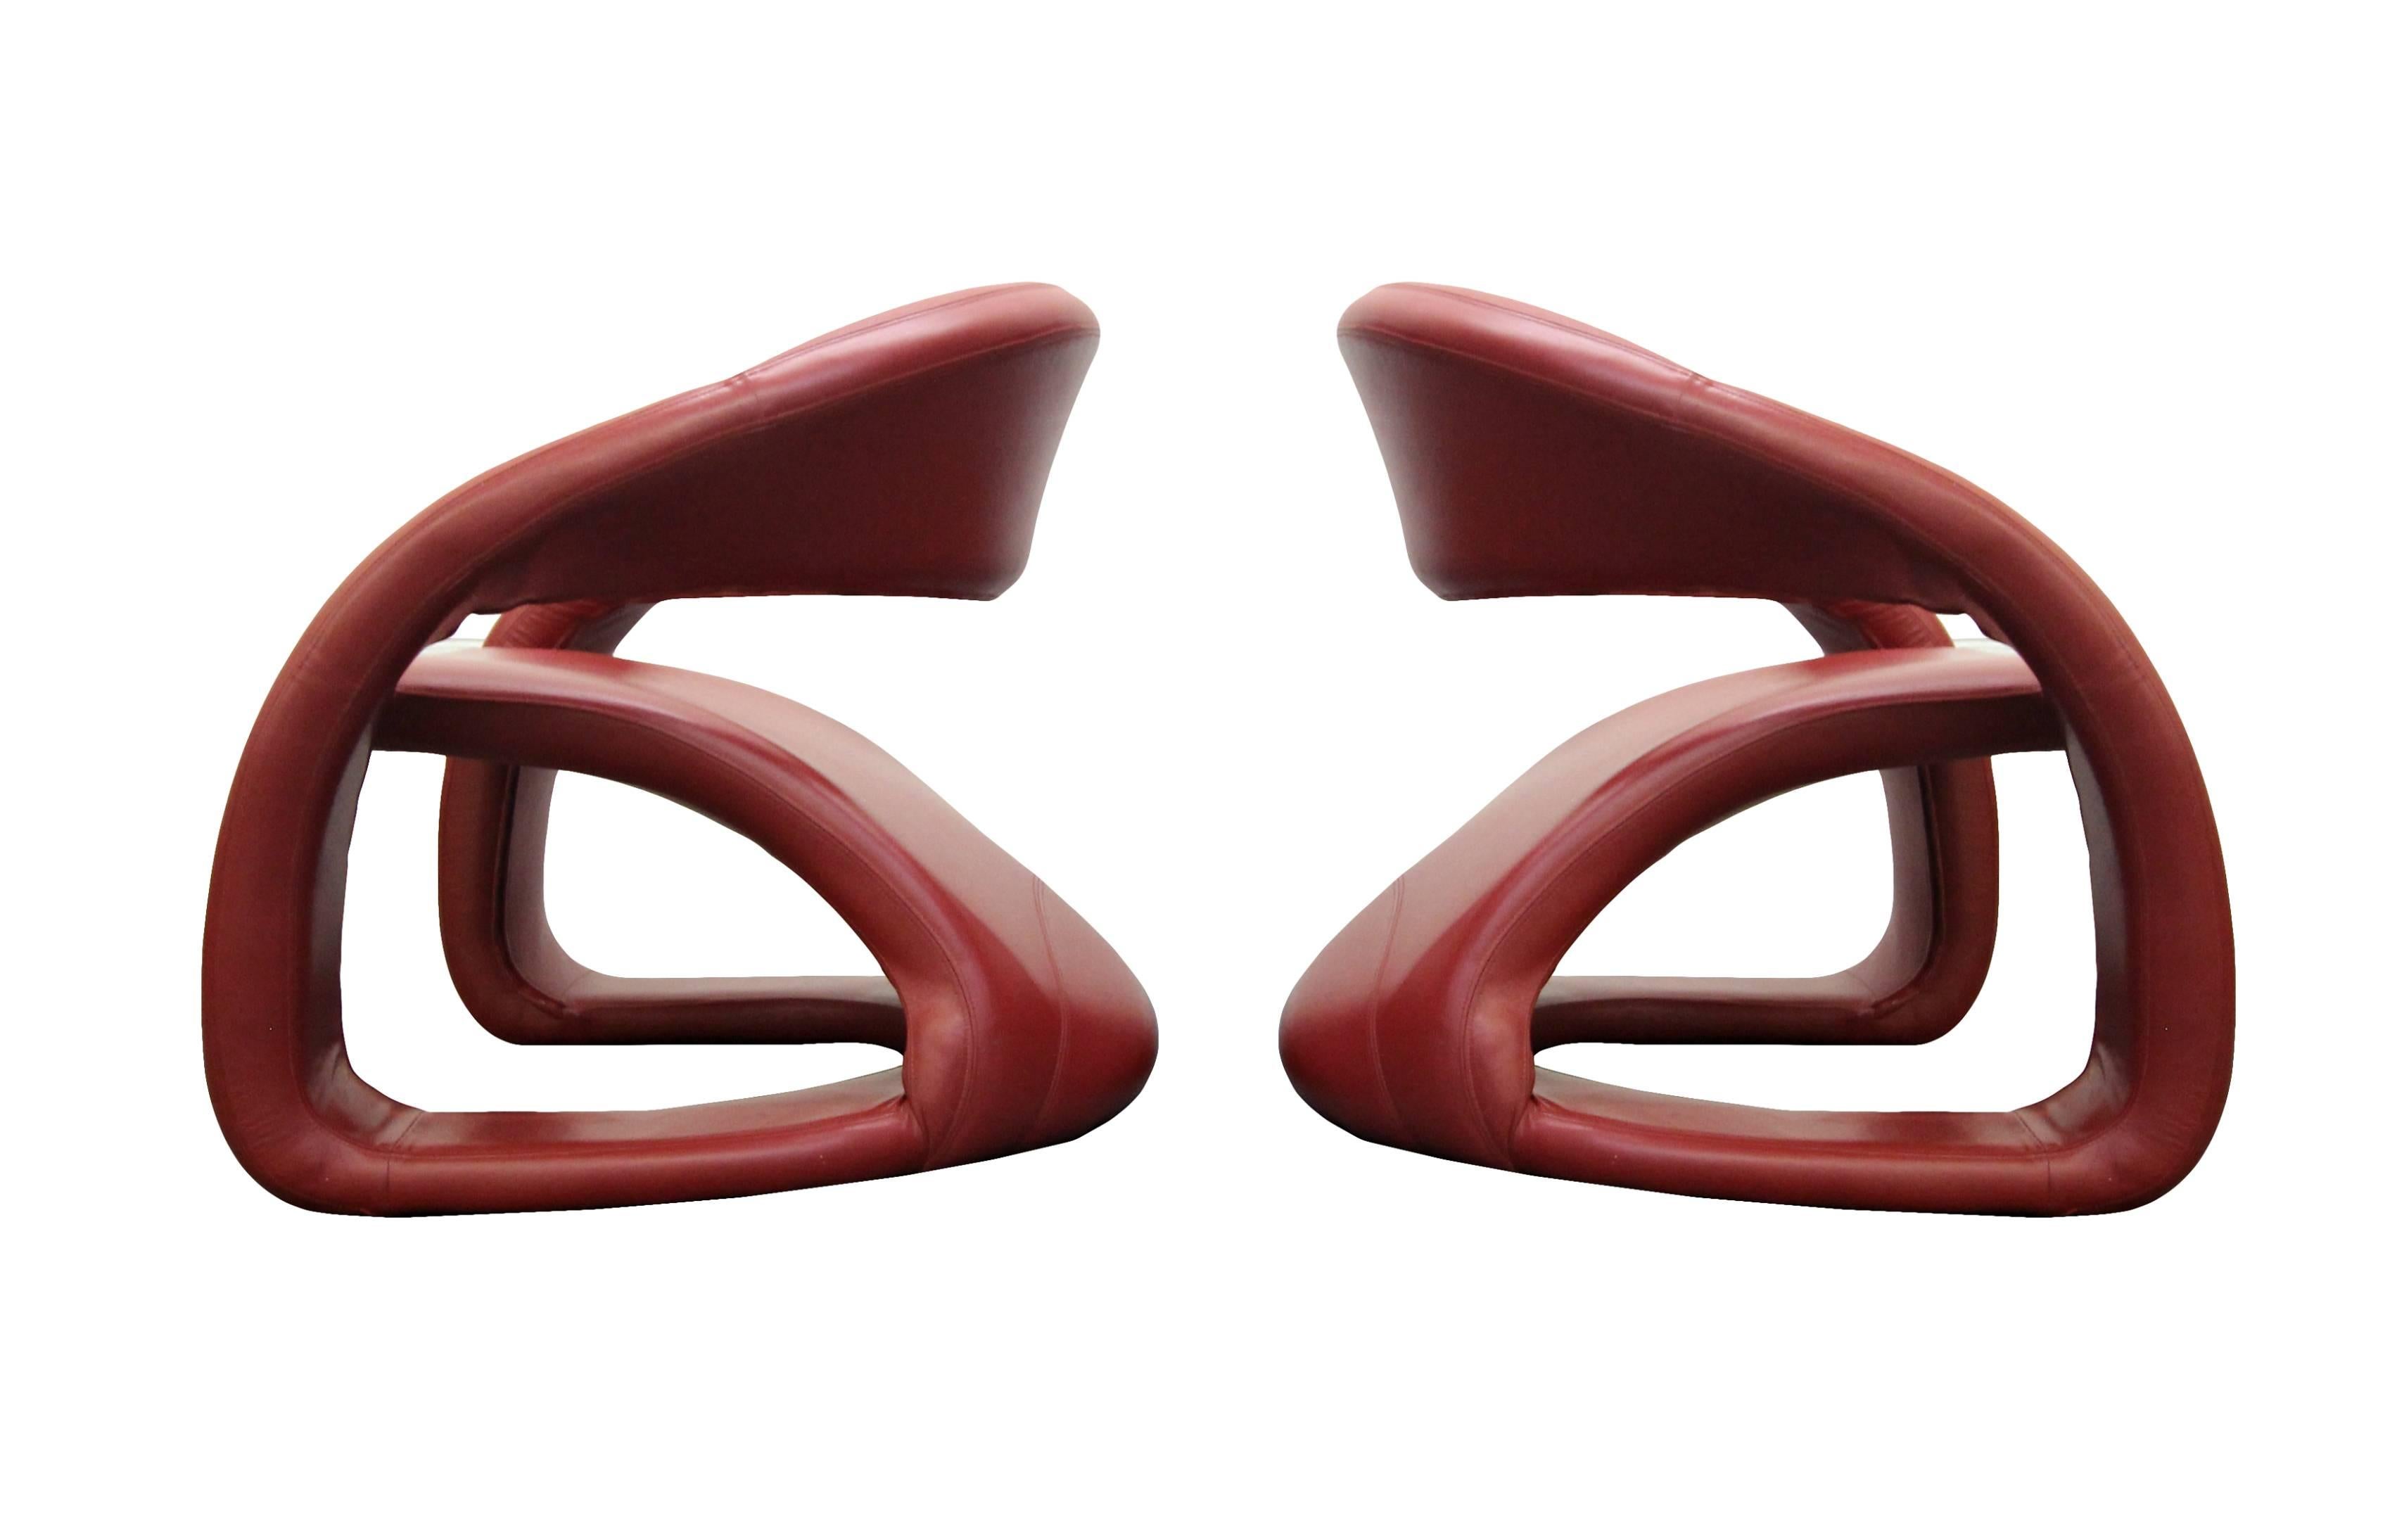 Pair of Memphis Milano style cantilevered lounge chairs. High quality chairs finished in bright red leather. These sculptural chairs are more like art pieces than furniture. These chairs are extremely comfortable making them dual purpose, form and